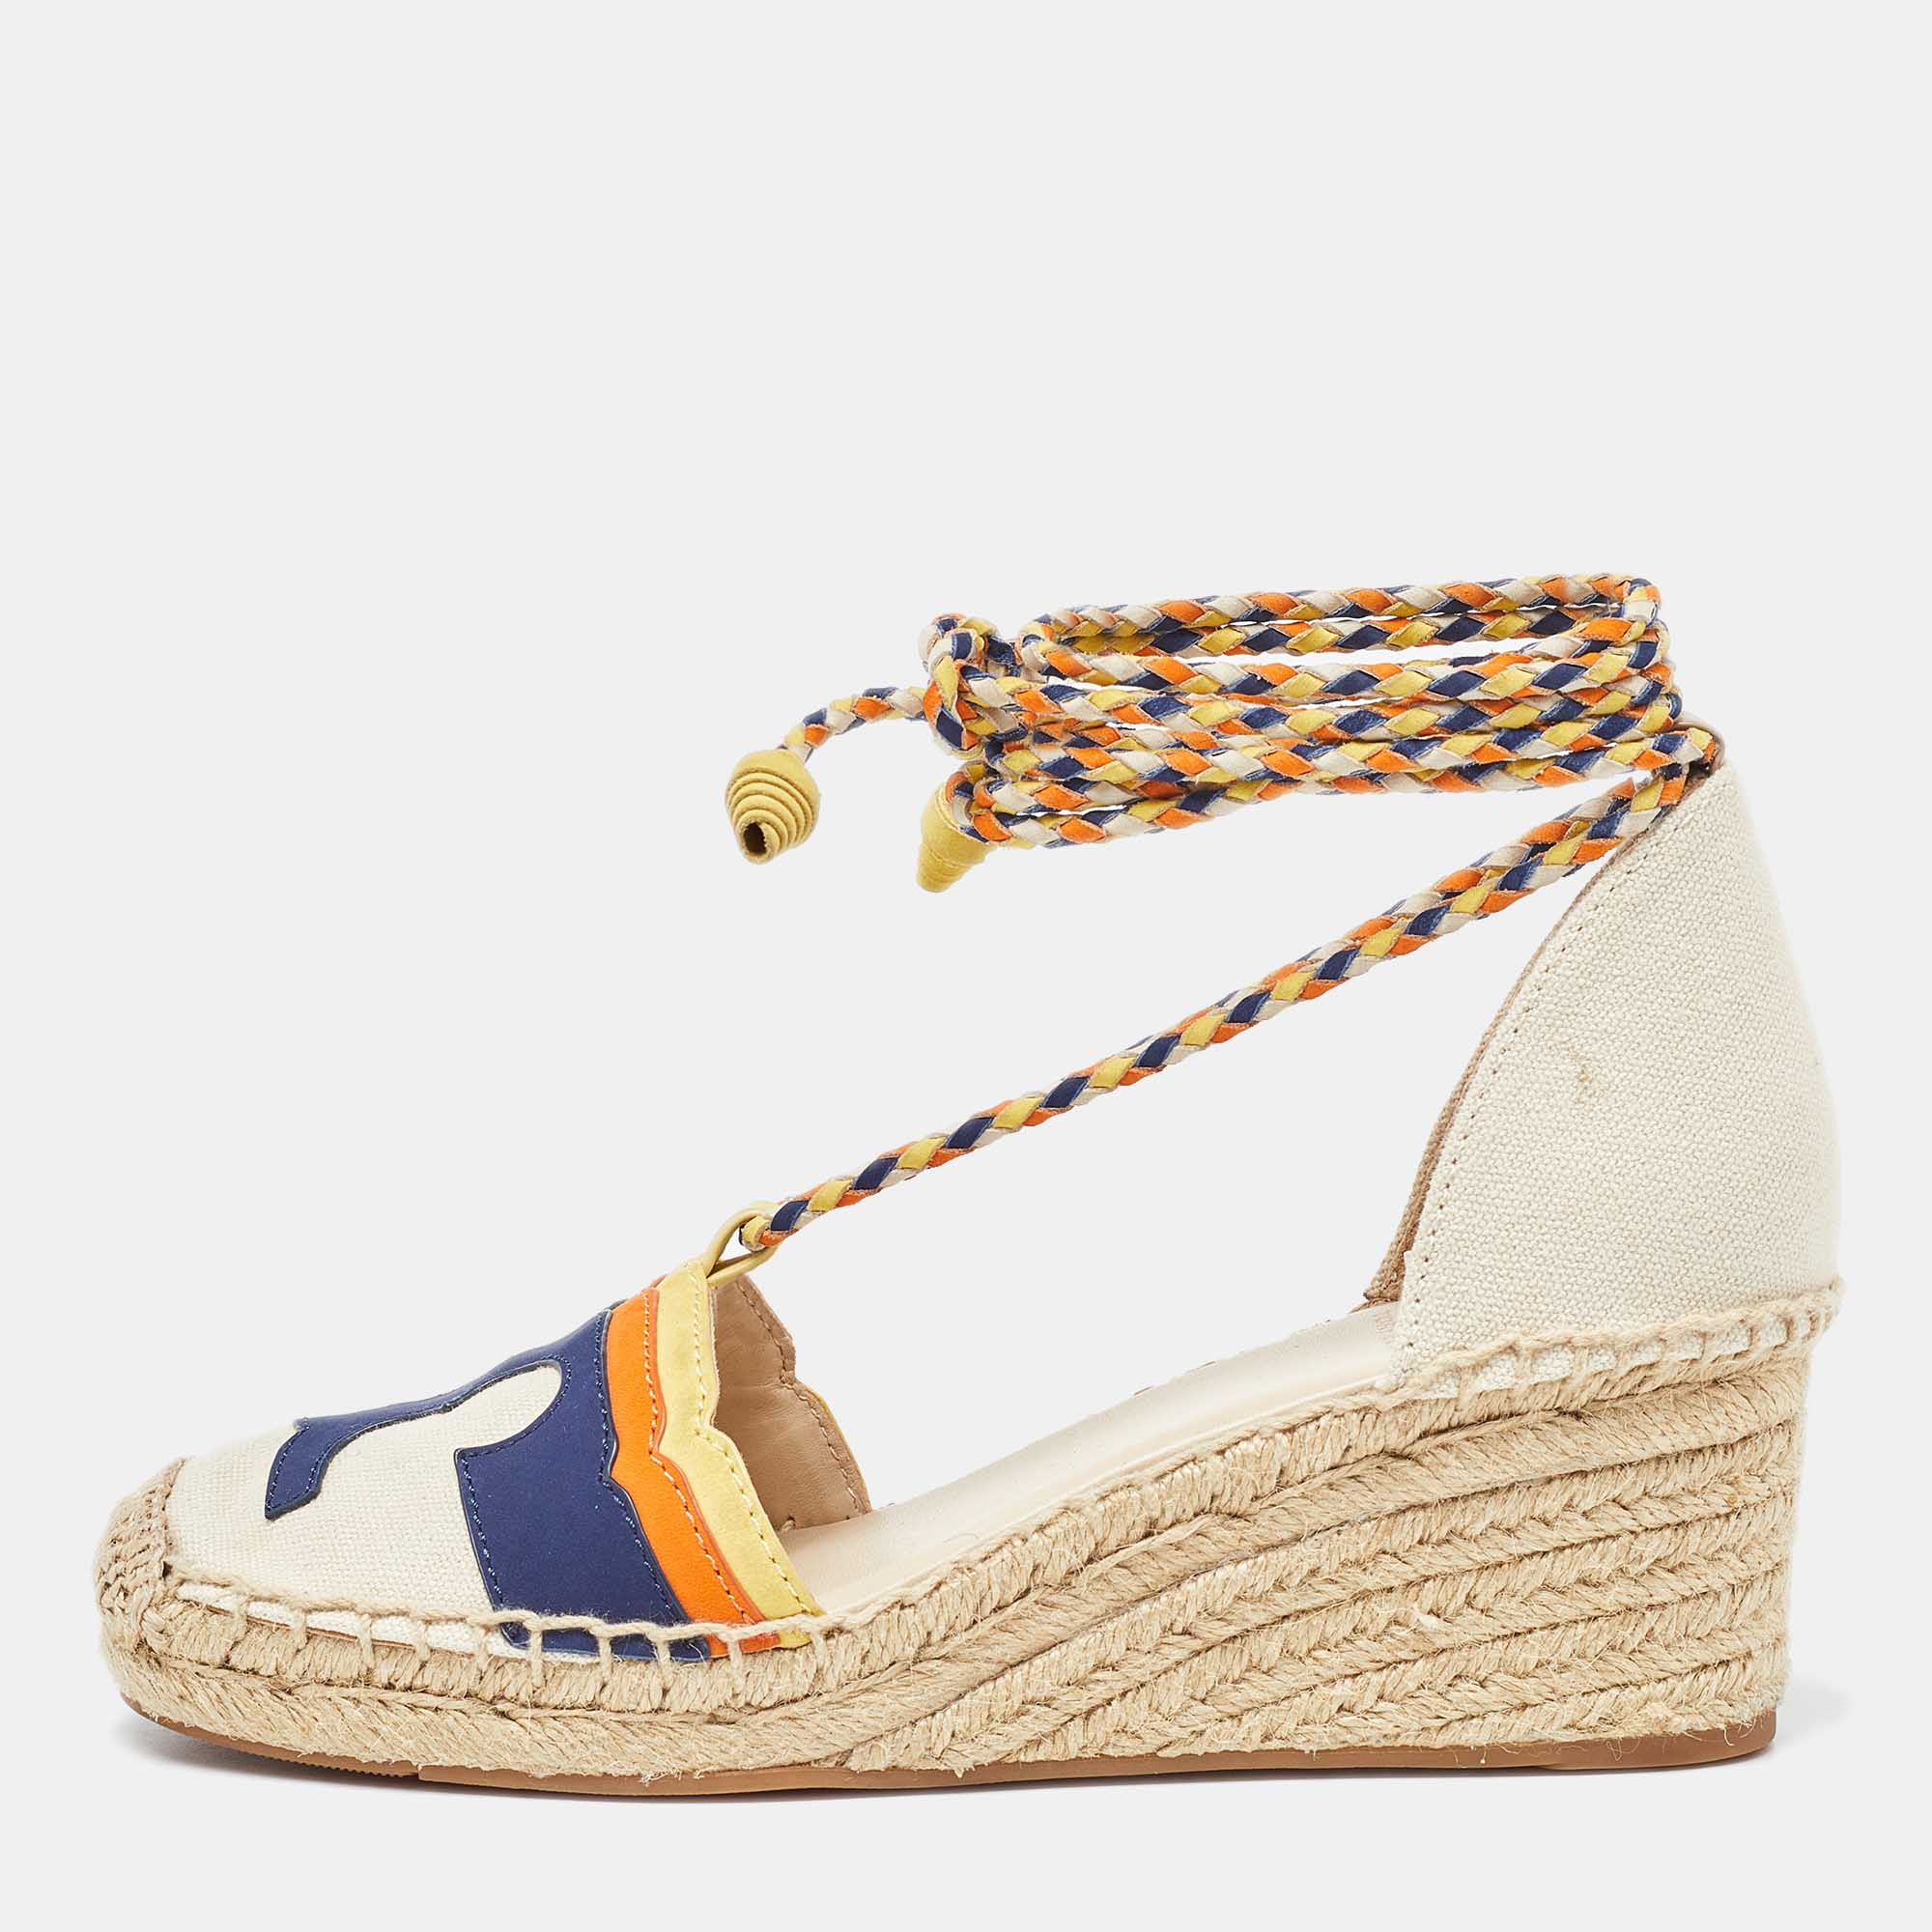 Complement your well put together outfit with these shoes by Tory Burch. They have an amazing construction for enduring quality and comfortable fit.